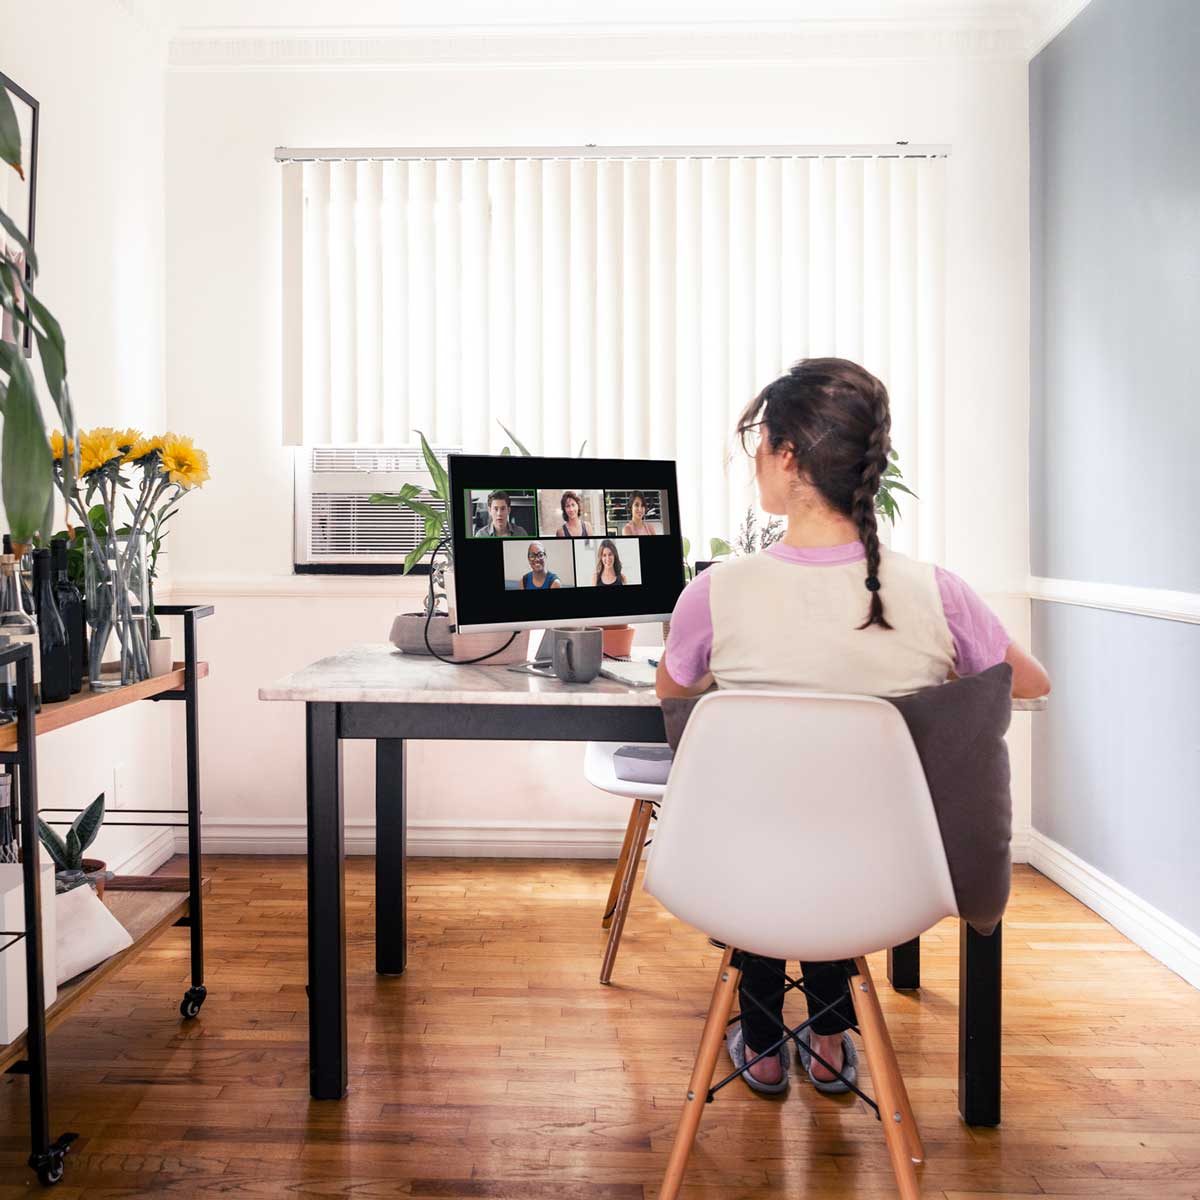 8 Tips for Setting Up a Productive Home Office | The Family Handyman